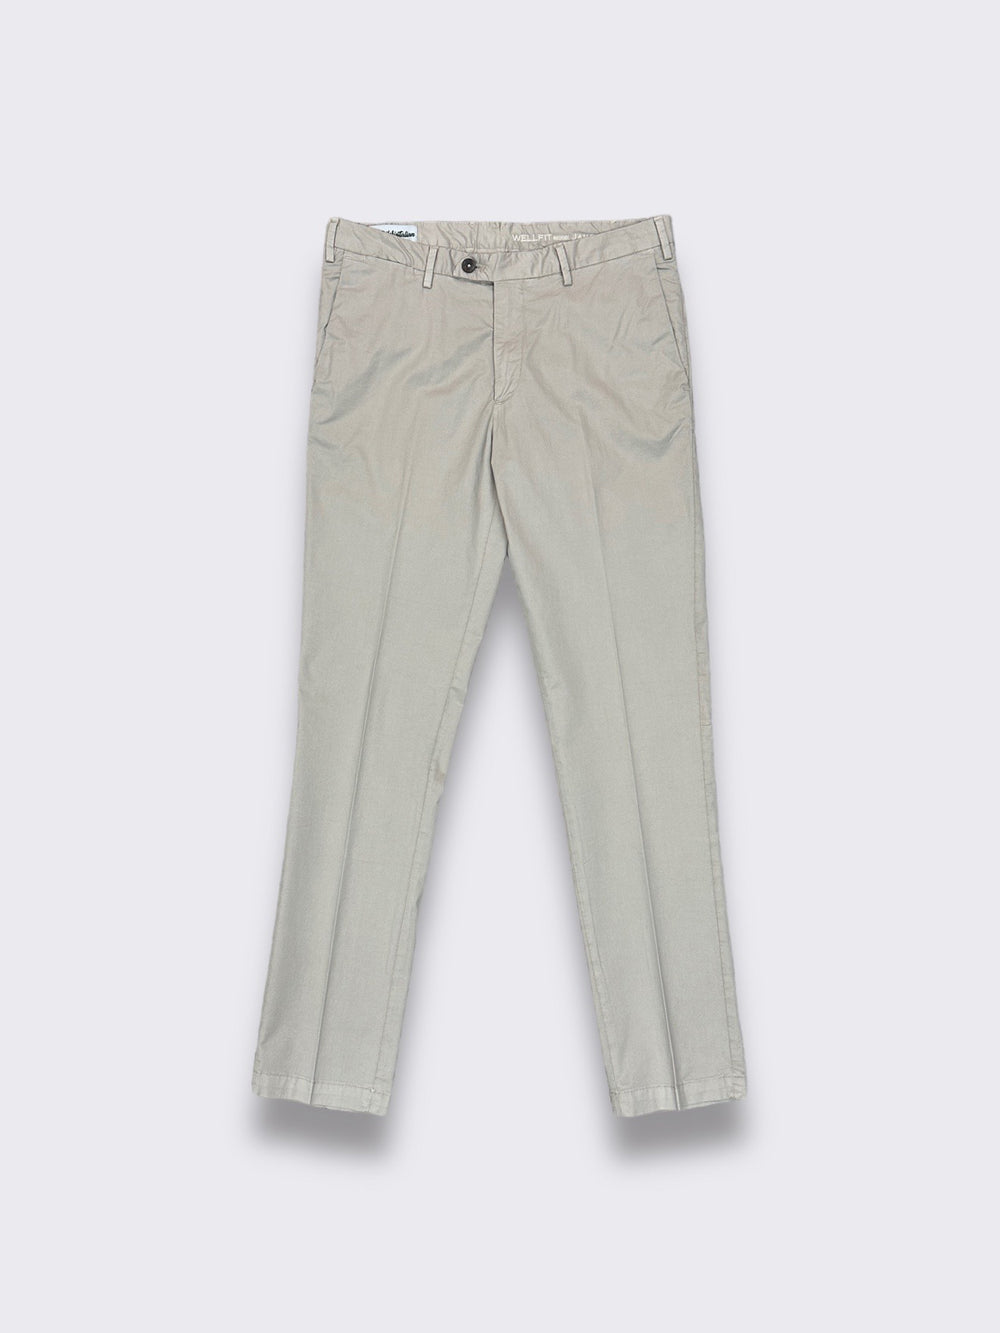 Beige/Sand Cotton and Silk Trousers